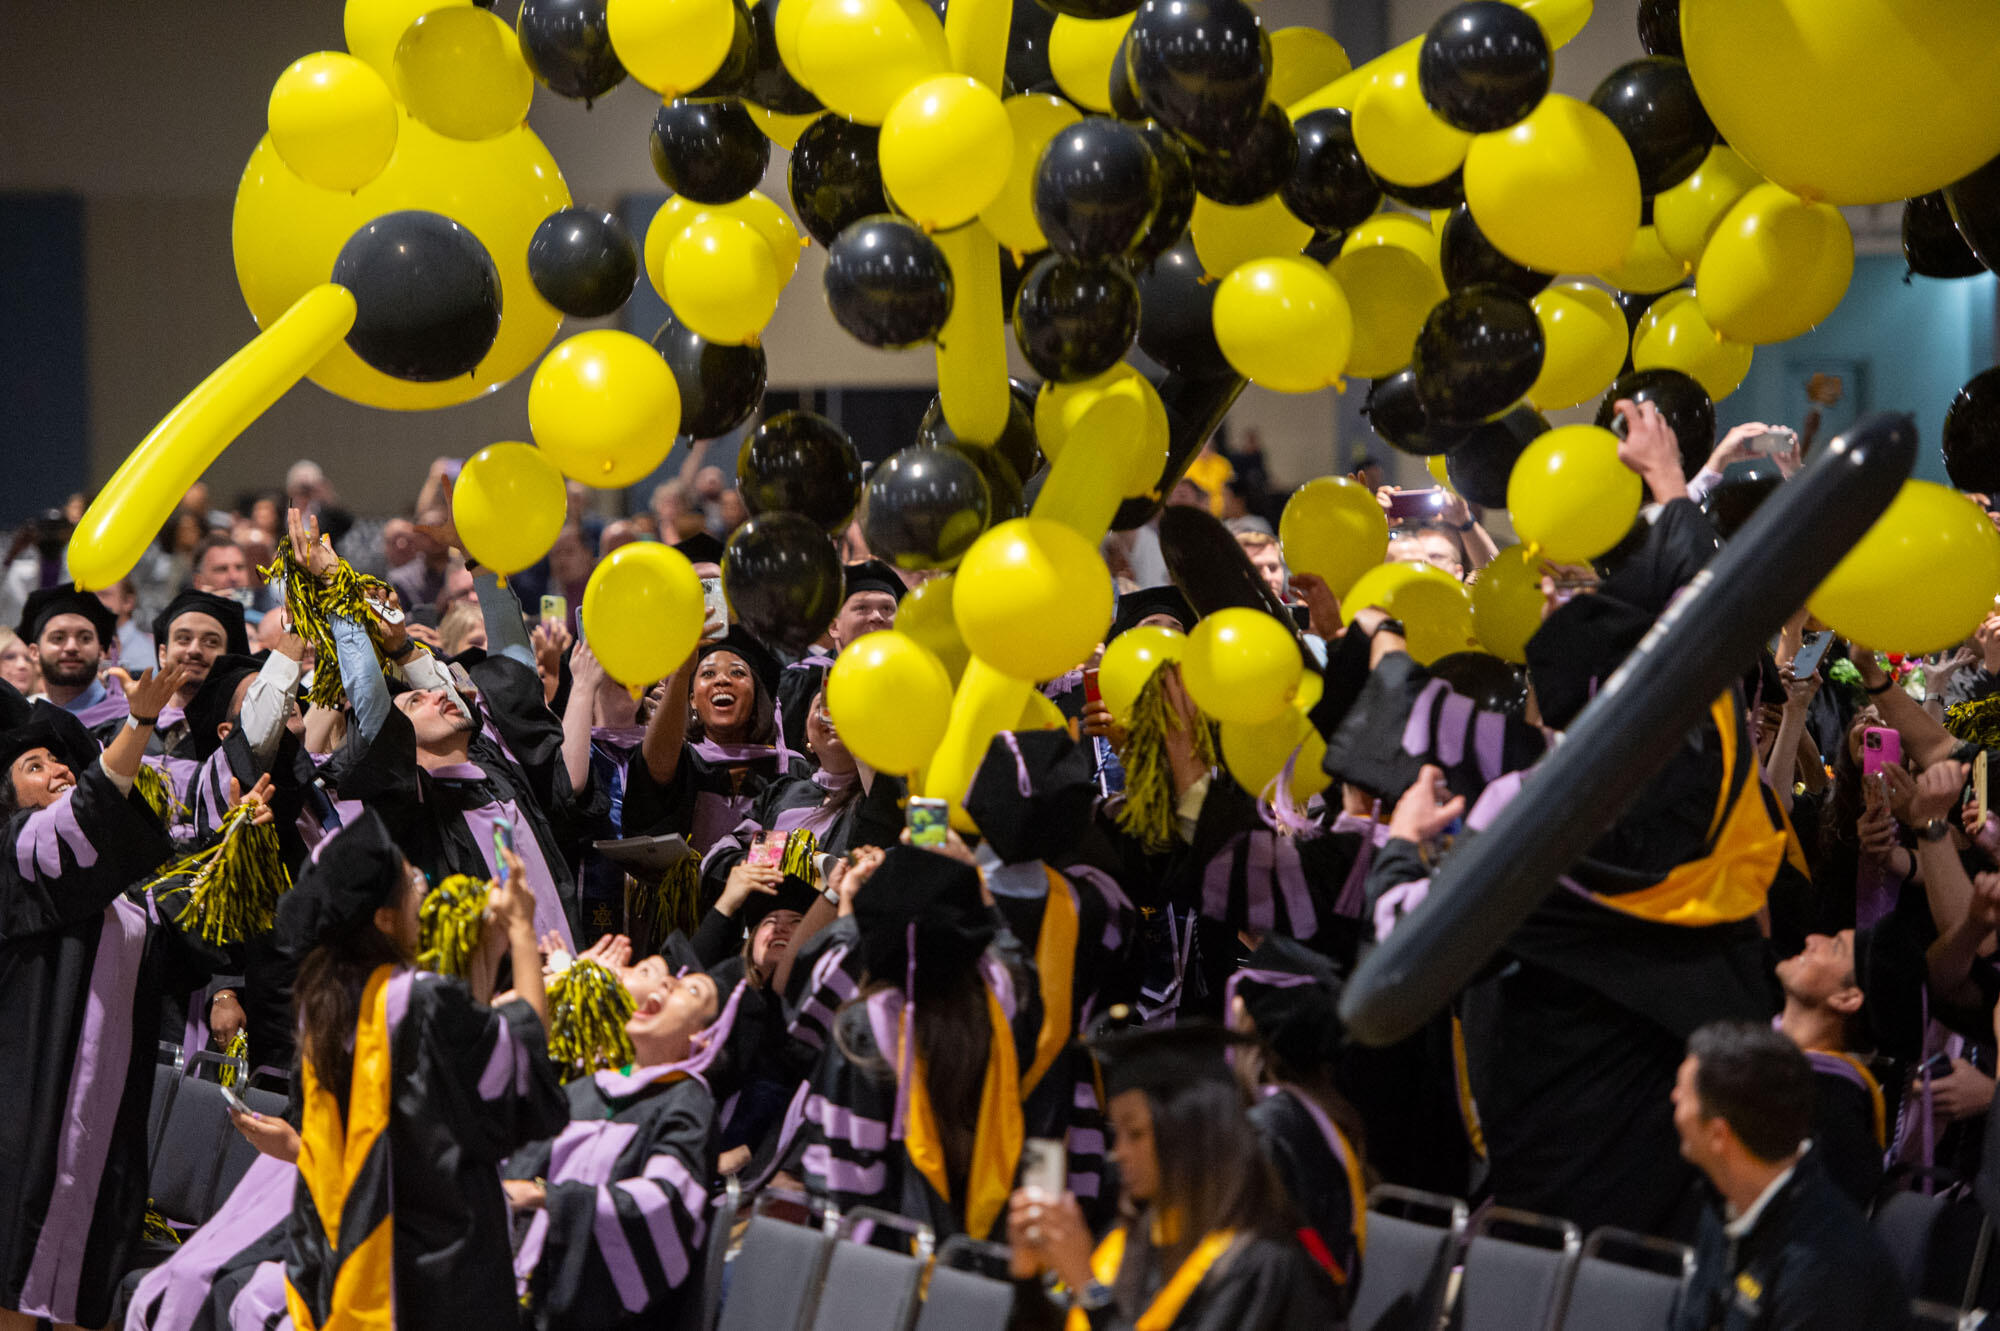 A photo of a crowd of students wearing graduation caps and gowns standing up under a bunch of falling balloons. The balloons are black and yellow.